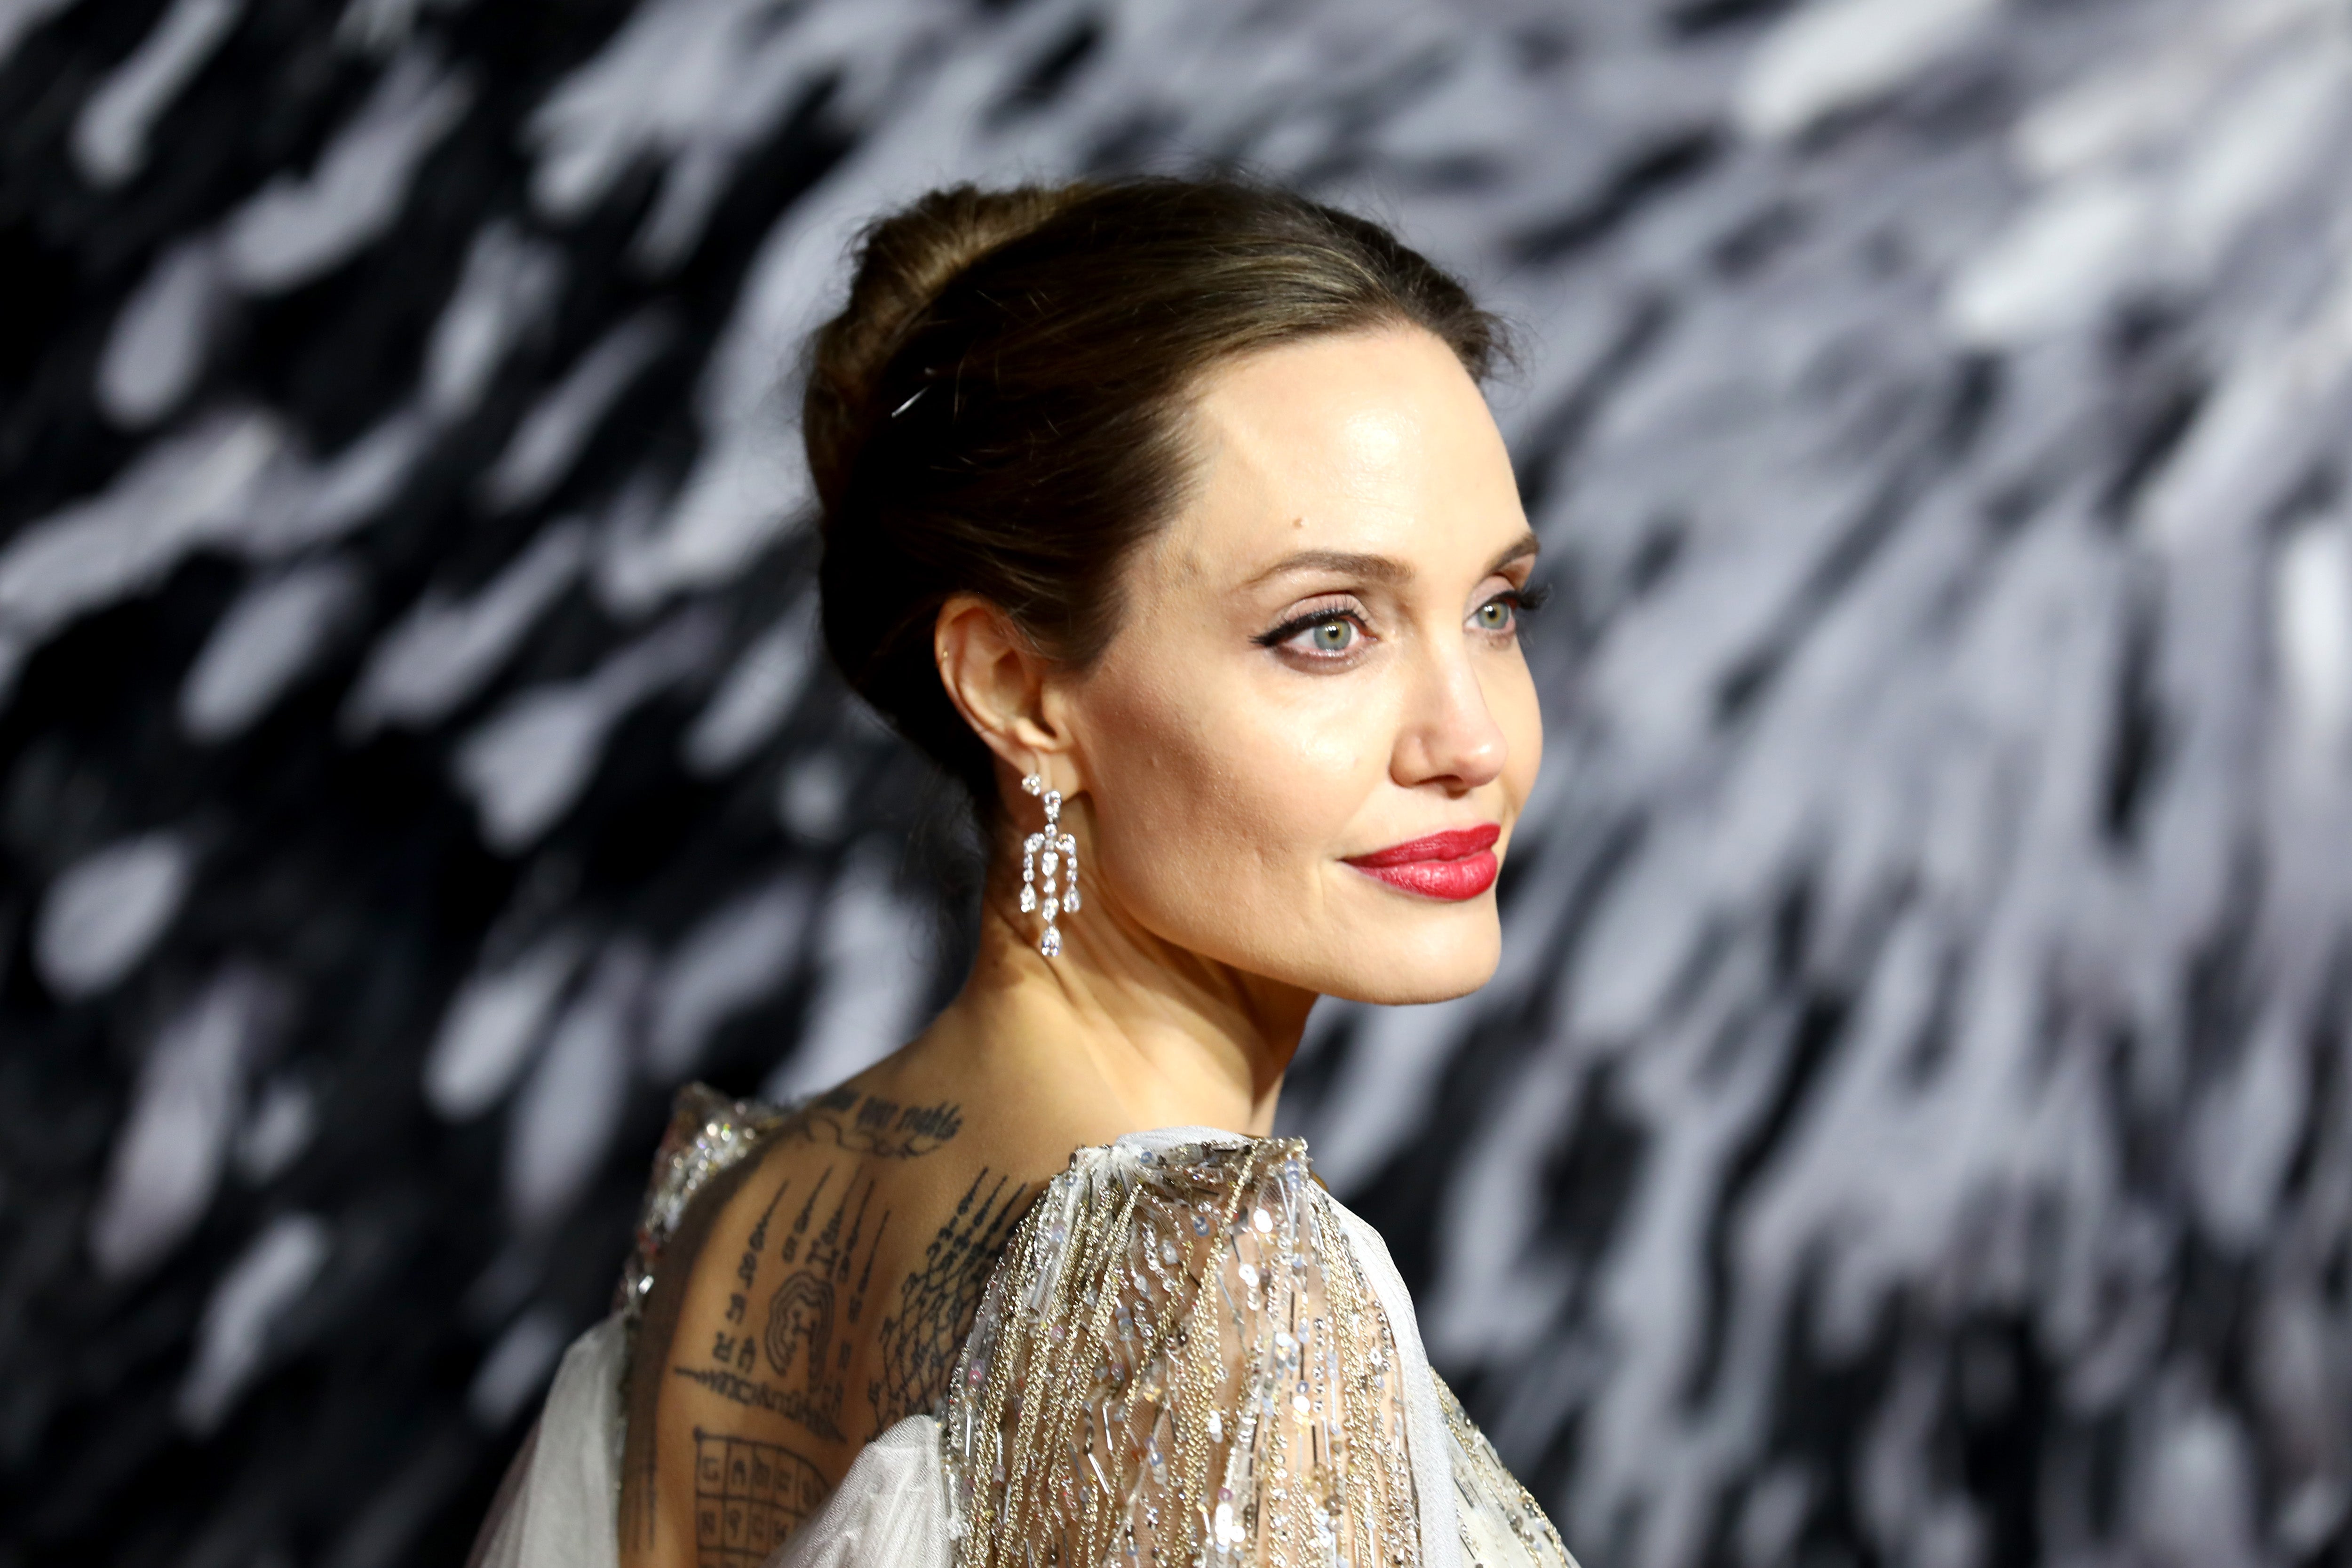 Angelina Jolie joins Instagram to share message about Afghanistan